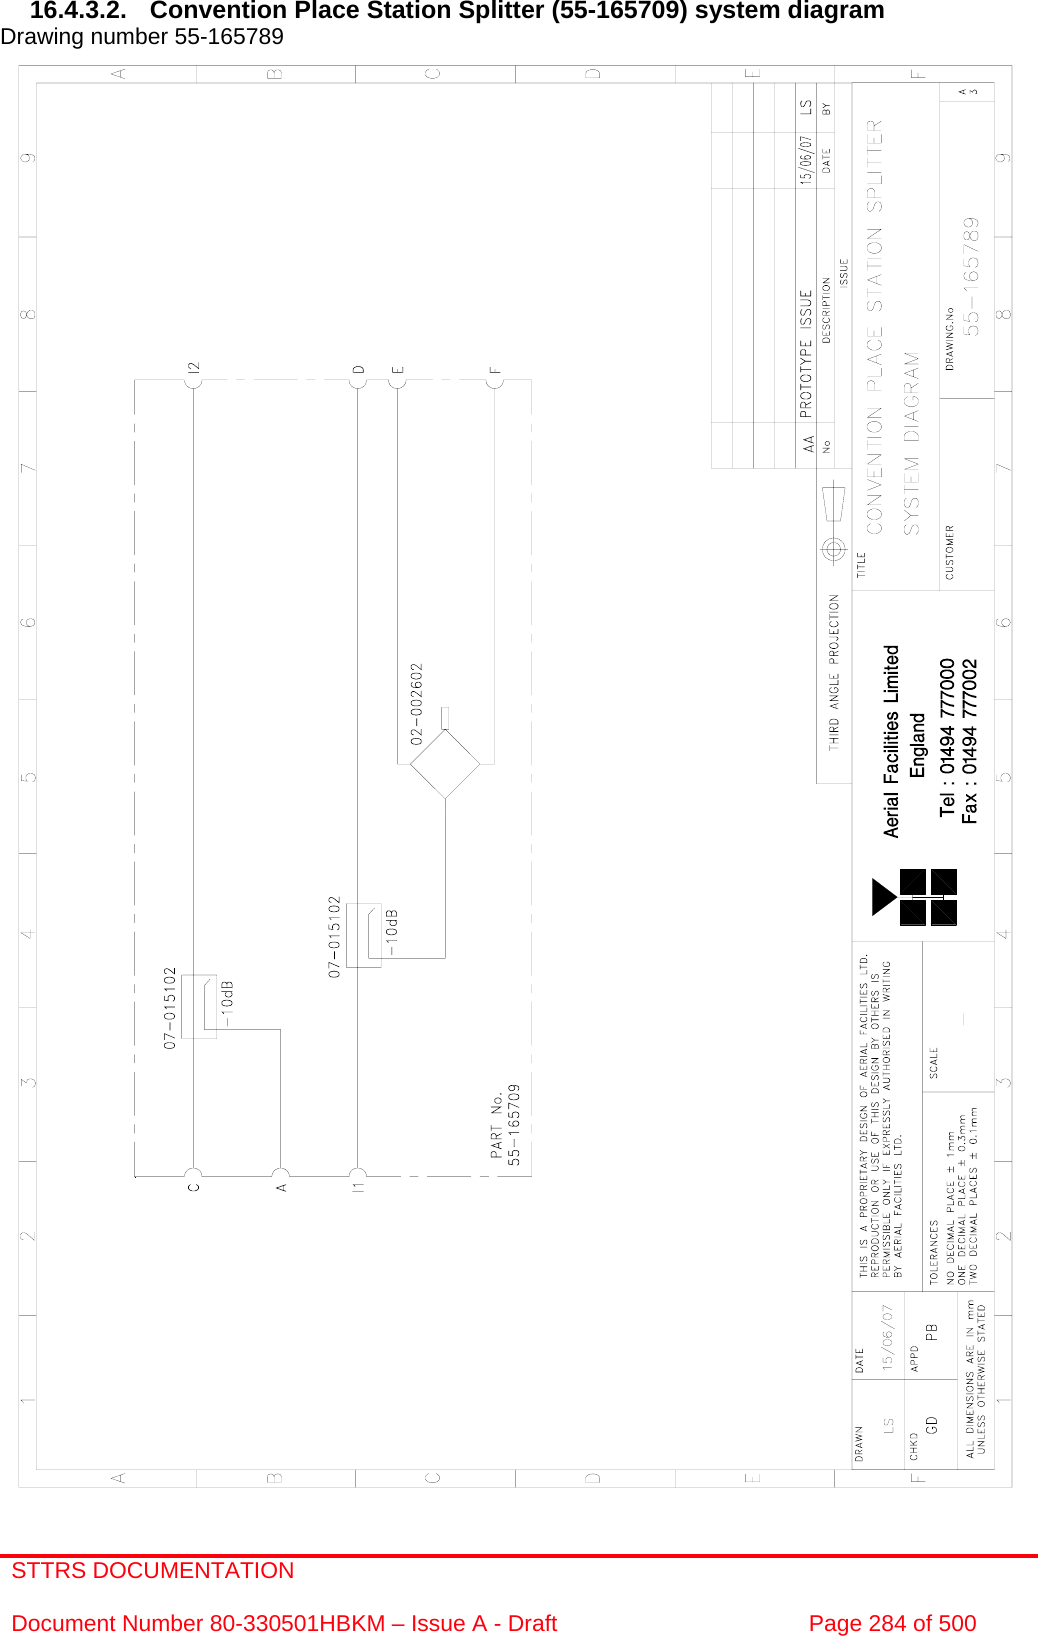 STTRS DOCUMENTATION  Document Number 80-330501HBKM – Issue A - Draft  Page 284 of 500   16.4.3.2. Convention Place Station Splitter (55-165709) system diagram Drawing number 55-165789                                                    